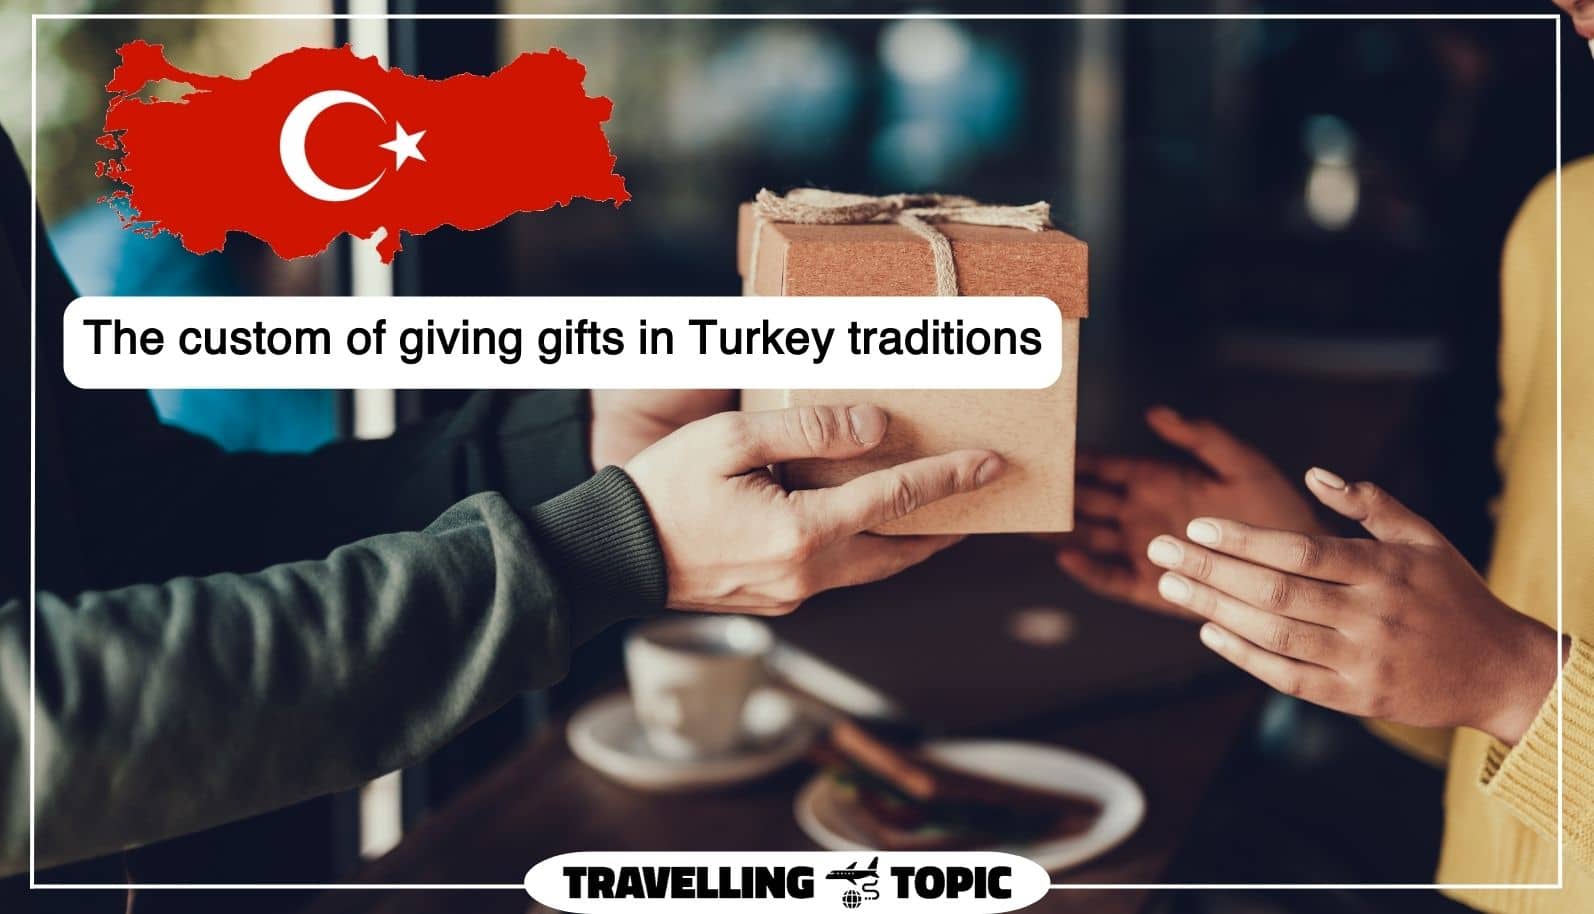 The custom of giving gifts in Turkey traditions